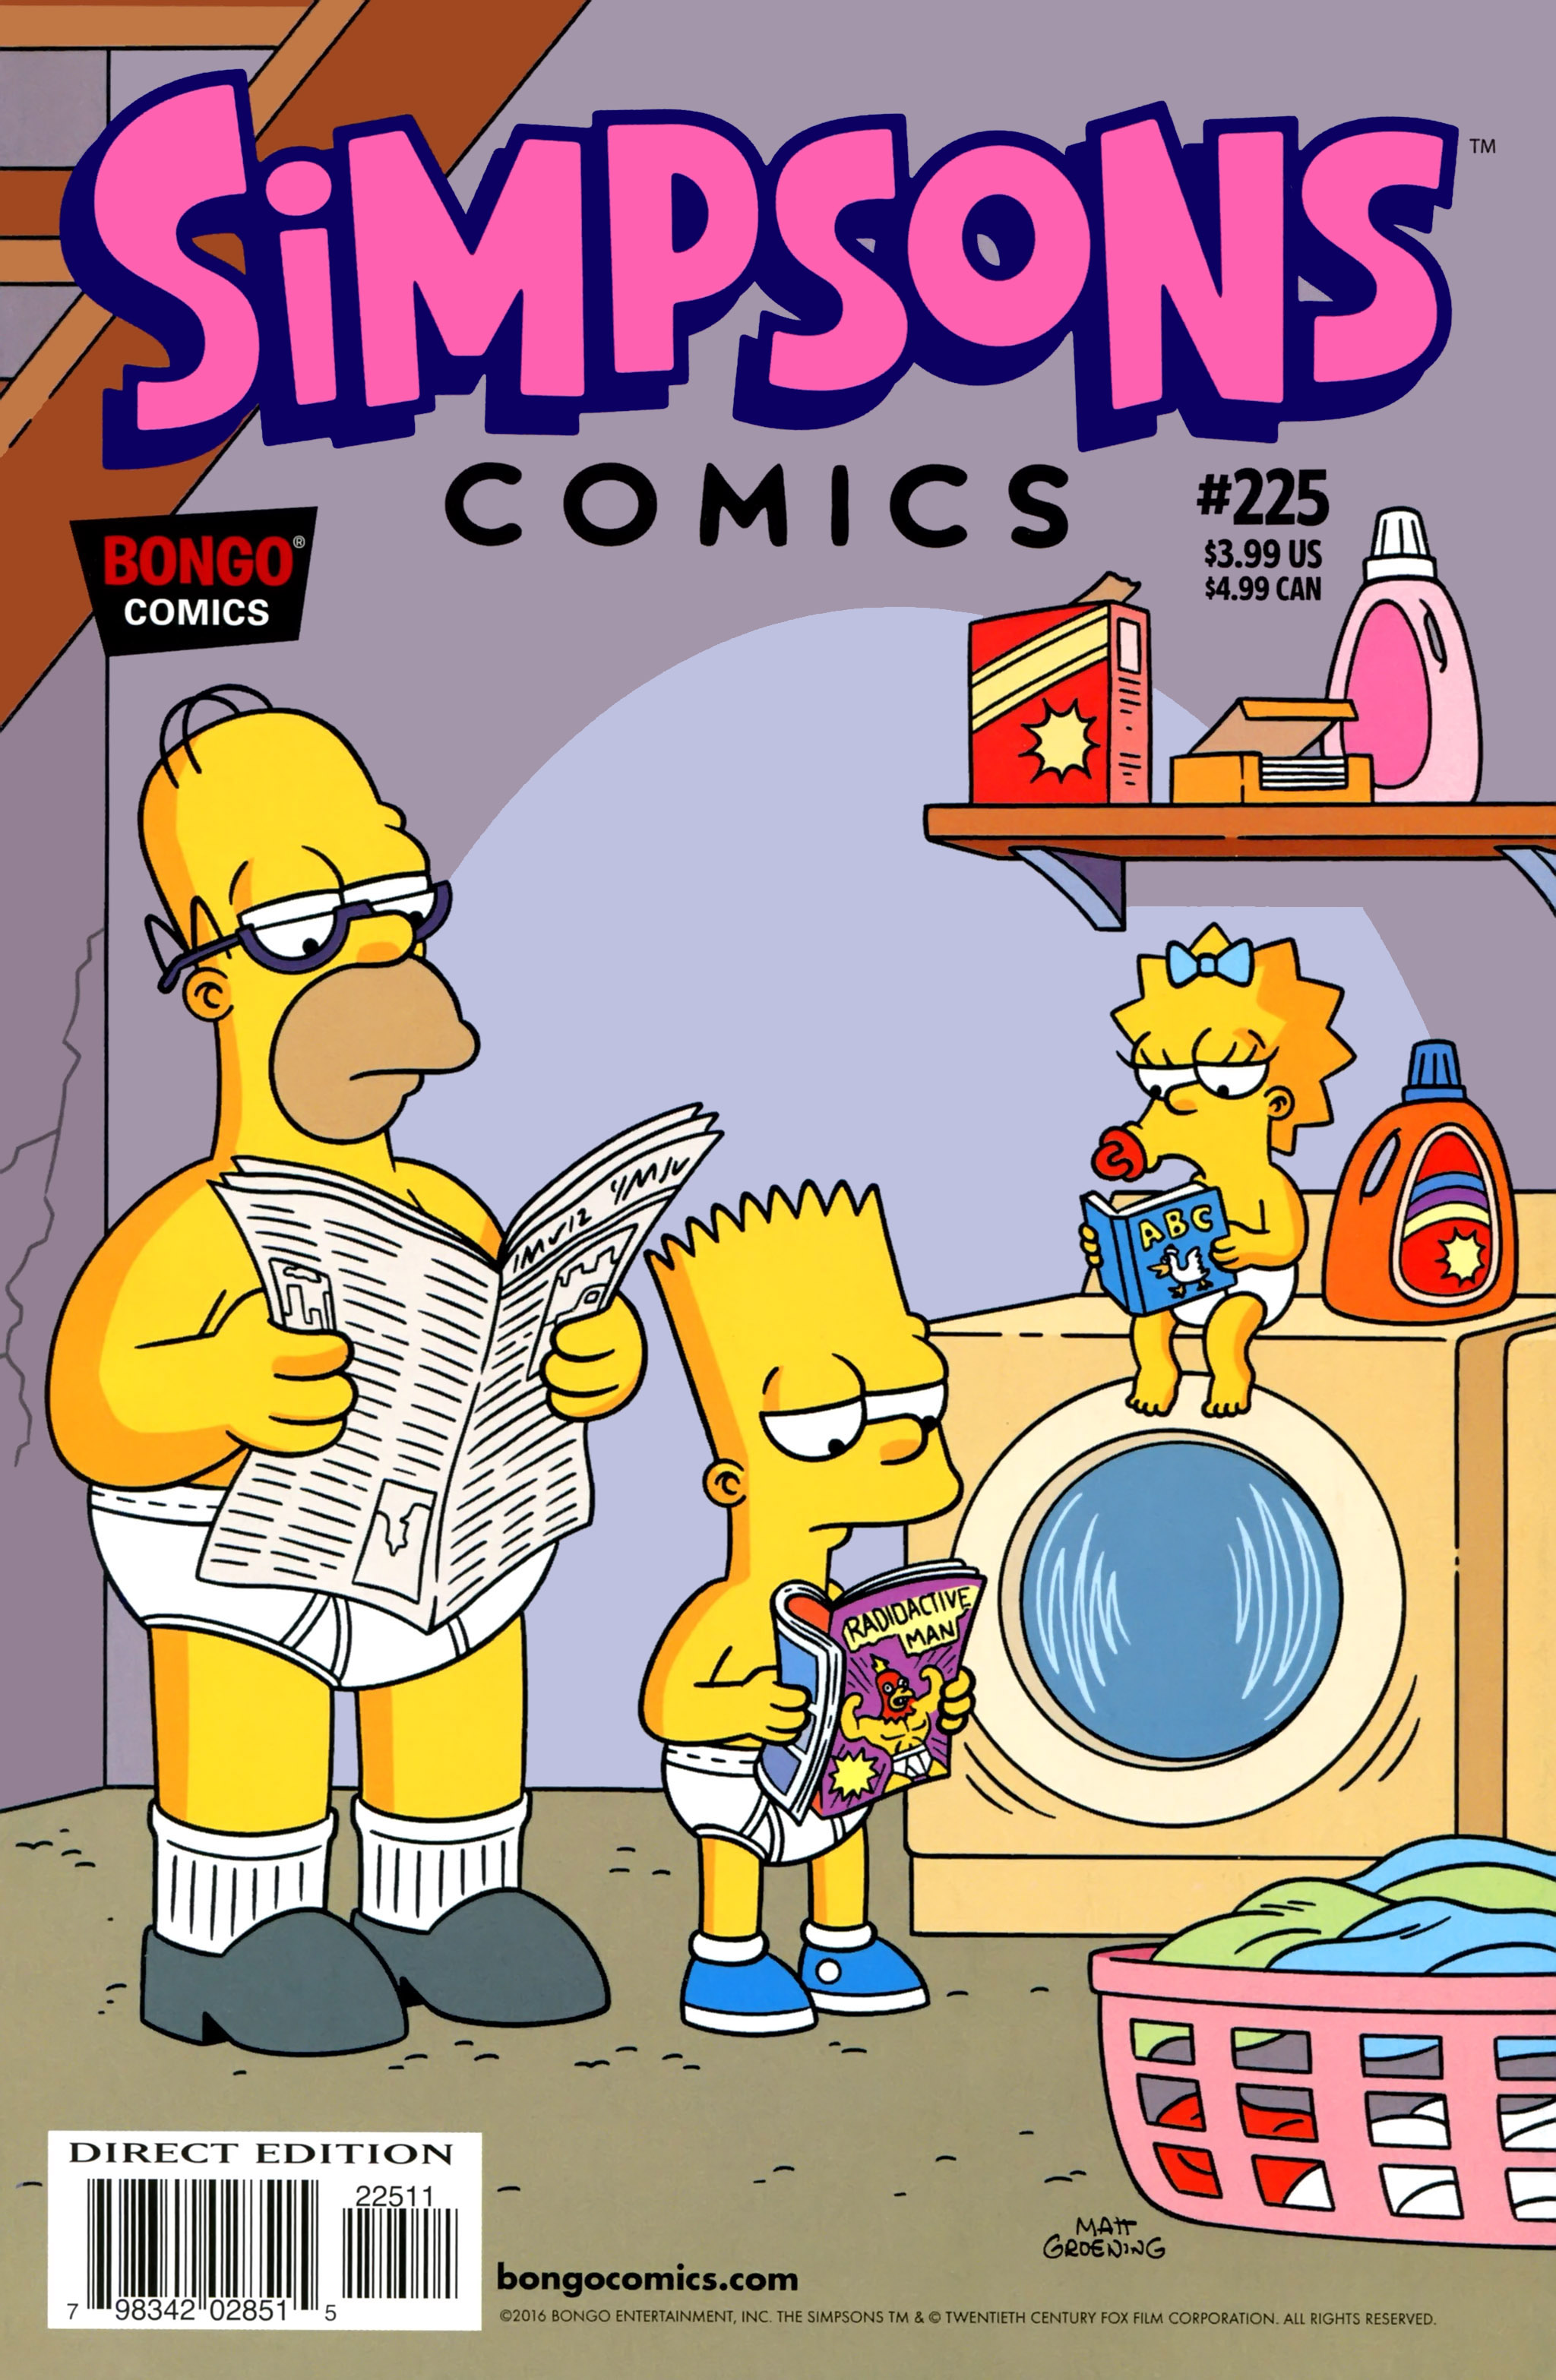 Simpsons Comics (1993-): Chapter 225 - Page 1